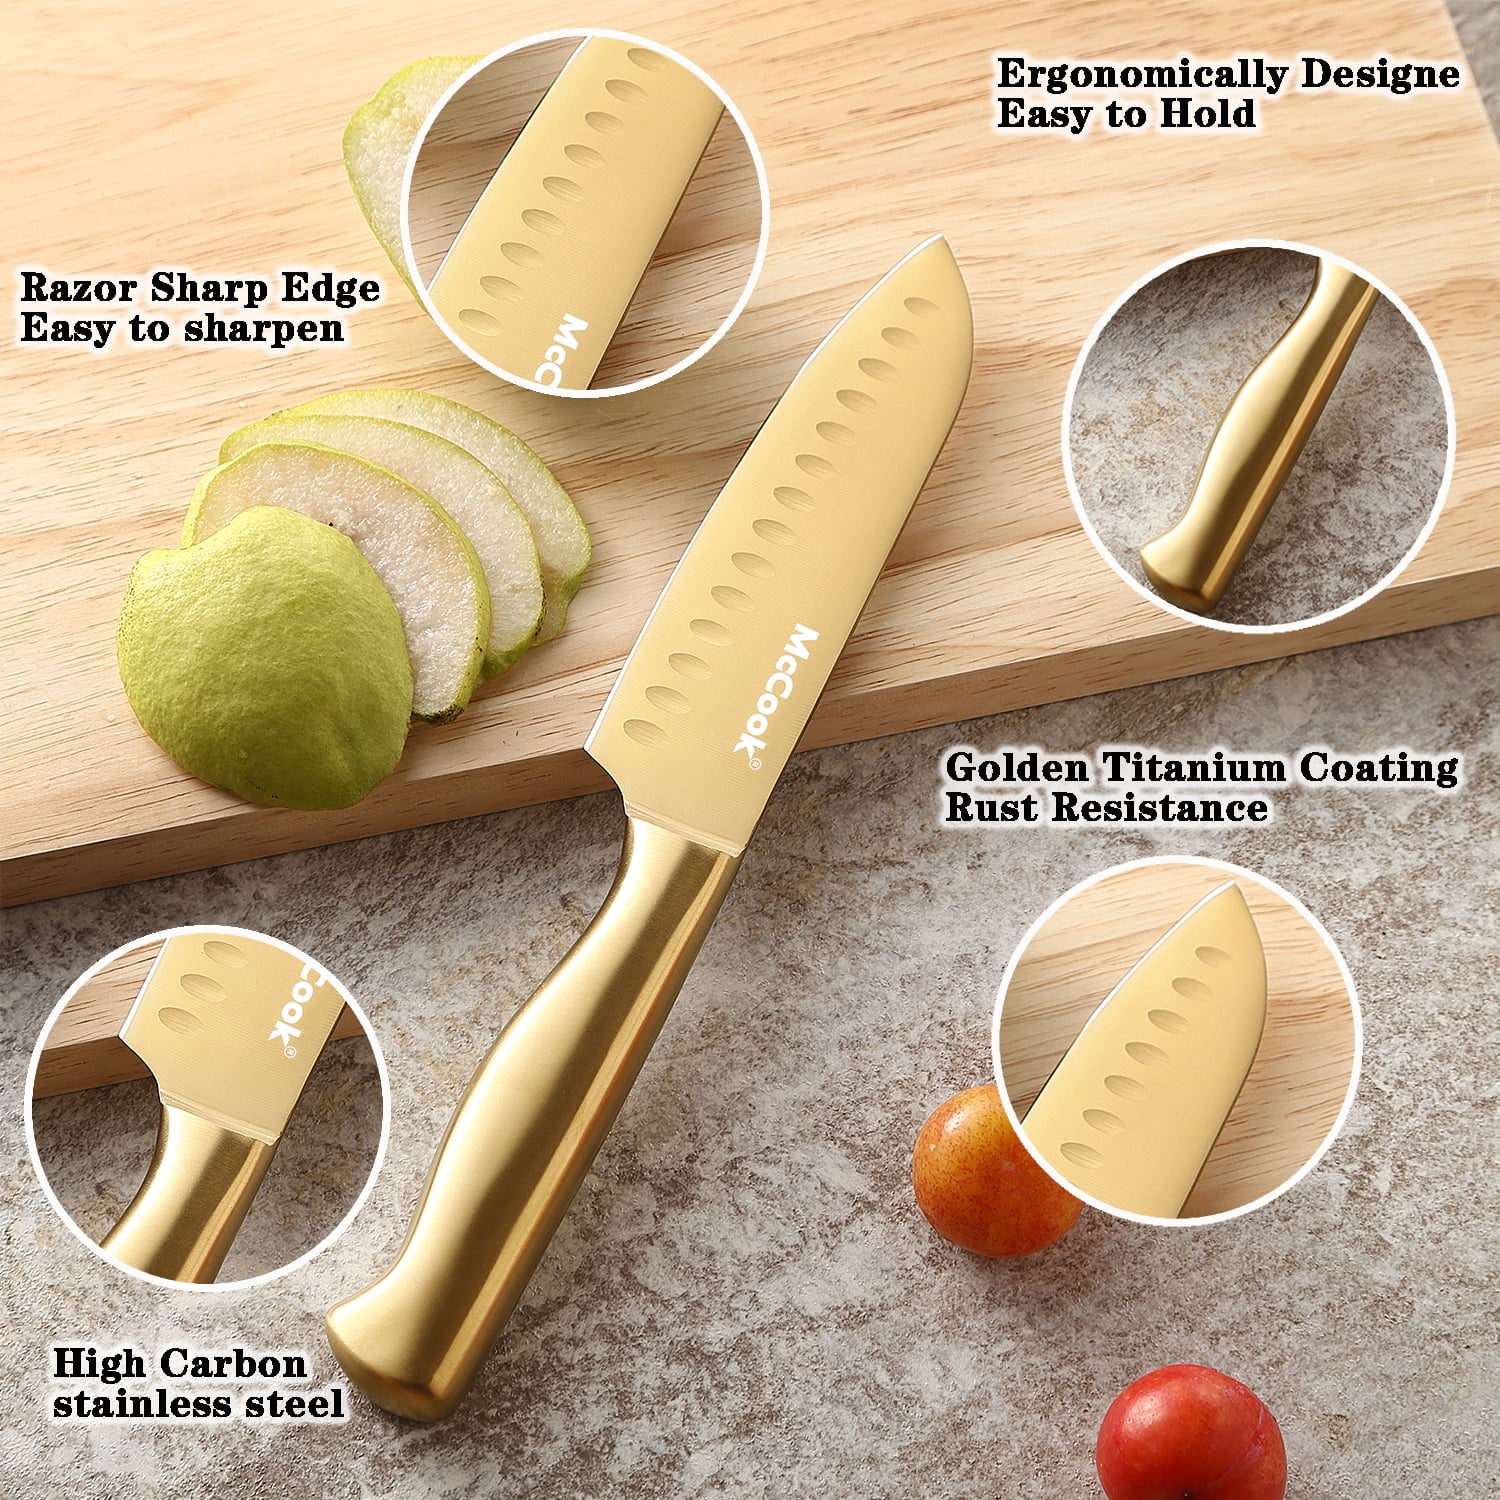 McCook® MC25A Knife Sets,15 Pieces German Stainless Steel Kitchen Knife  Block Set with Built-in Sharpener - Coupon Codes, Promo Codes, Daily Deals,  Save Money Today